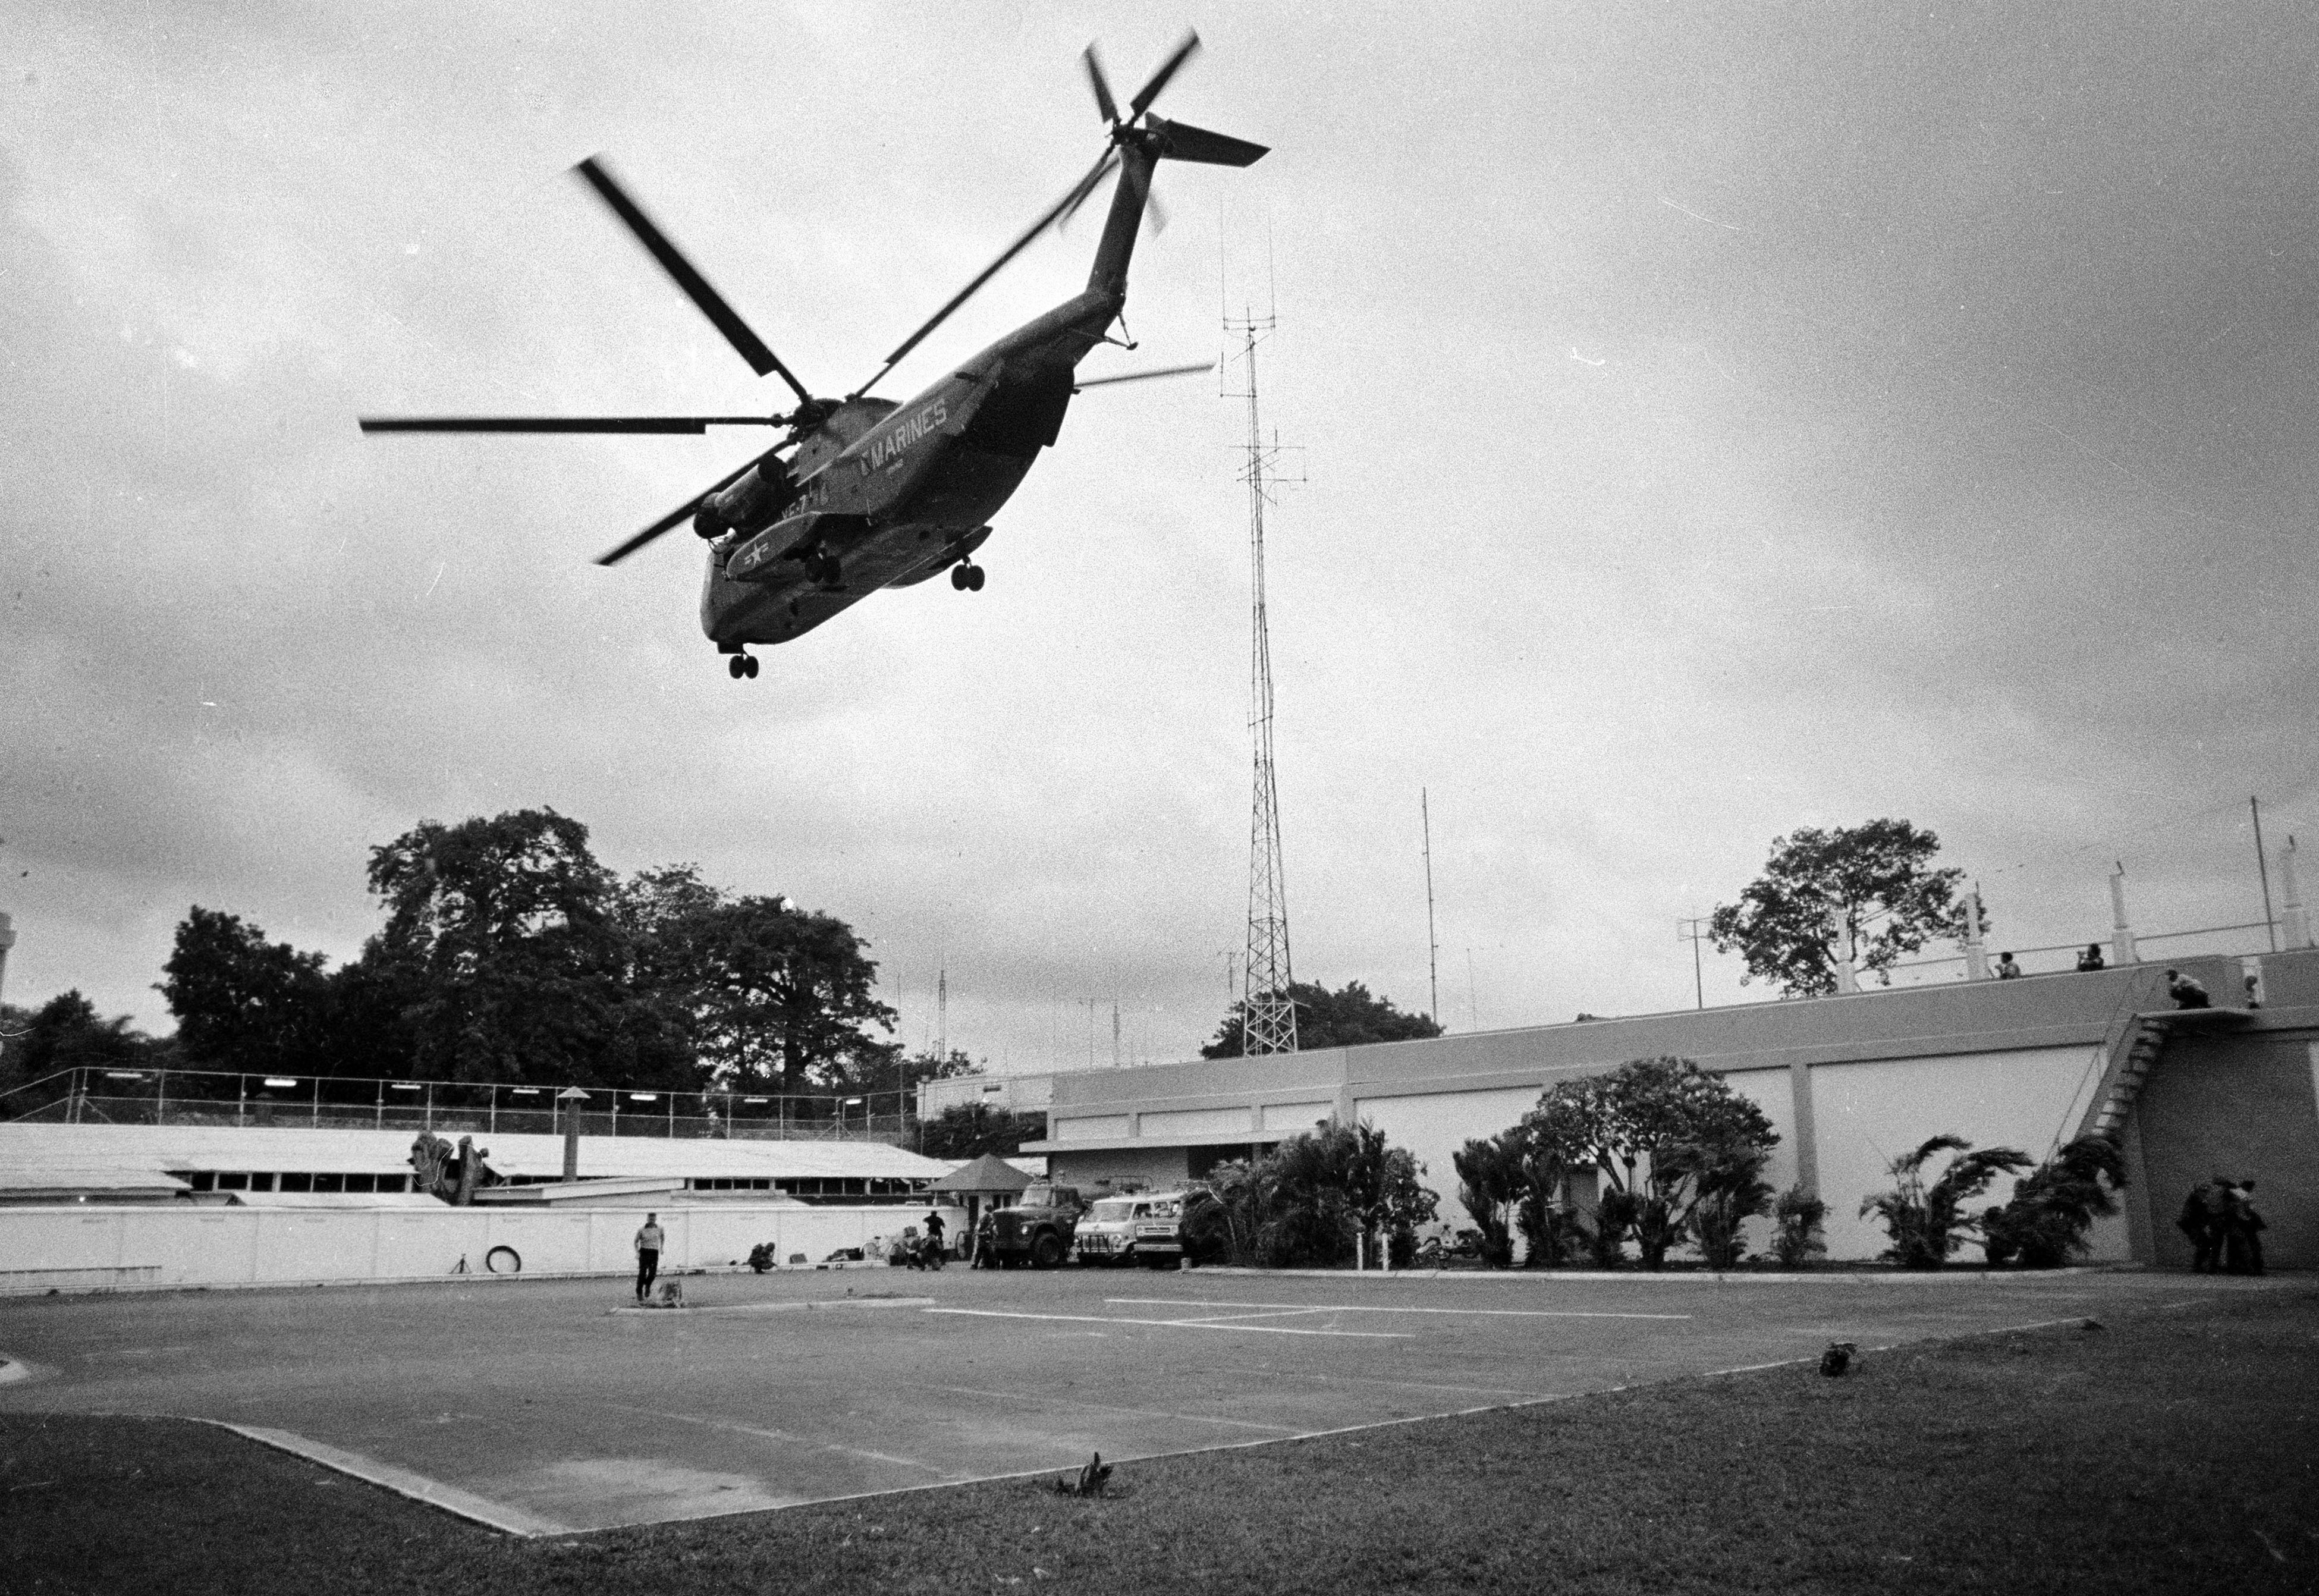 In this April 29, 1975, file photo, a helicopter lifts off from the U.S. embassy in Saigon, Vietnam during last minute evacuation of authorized personnel and civilians. (AP Photo/File)